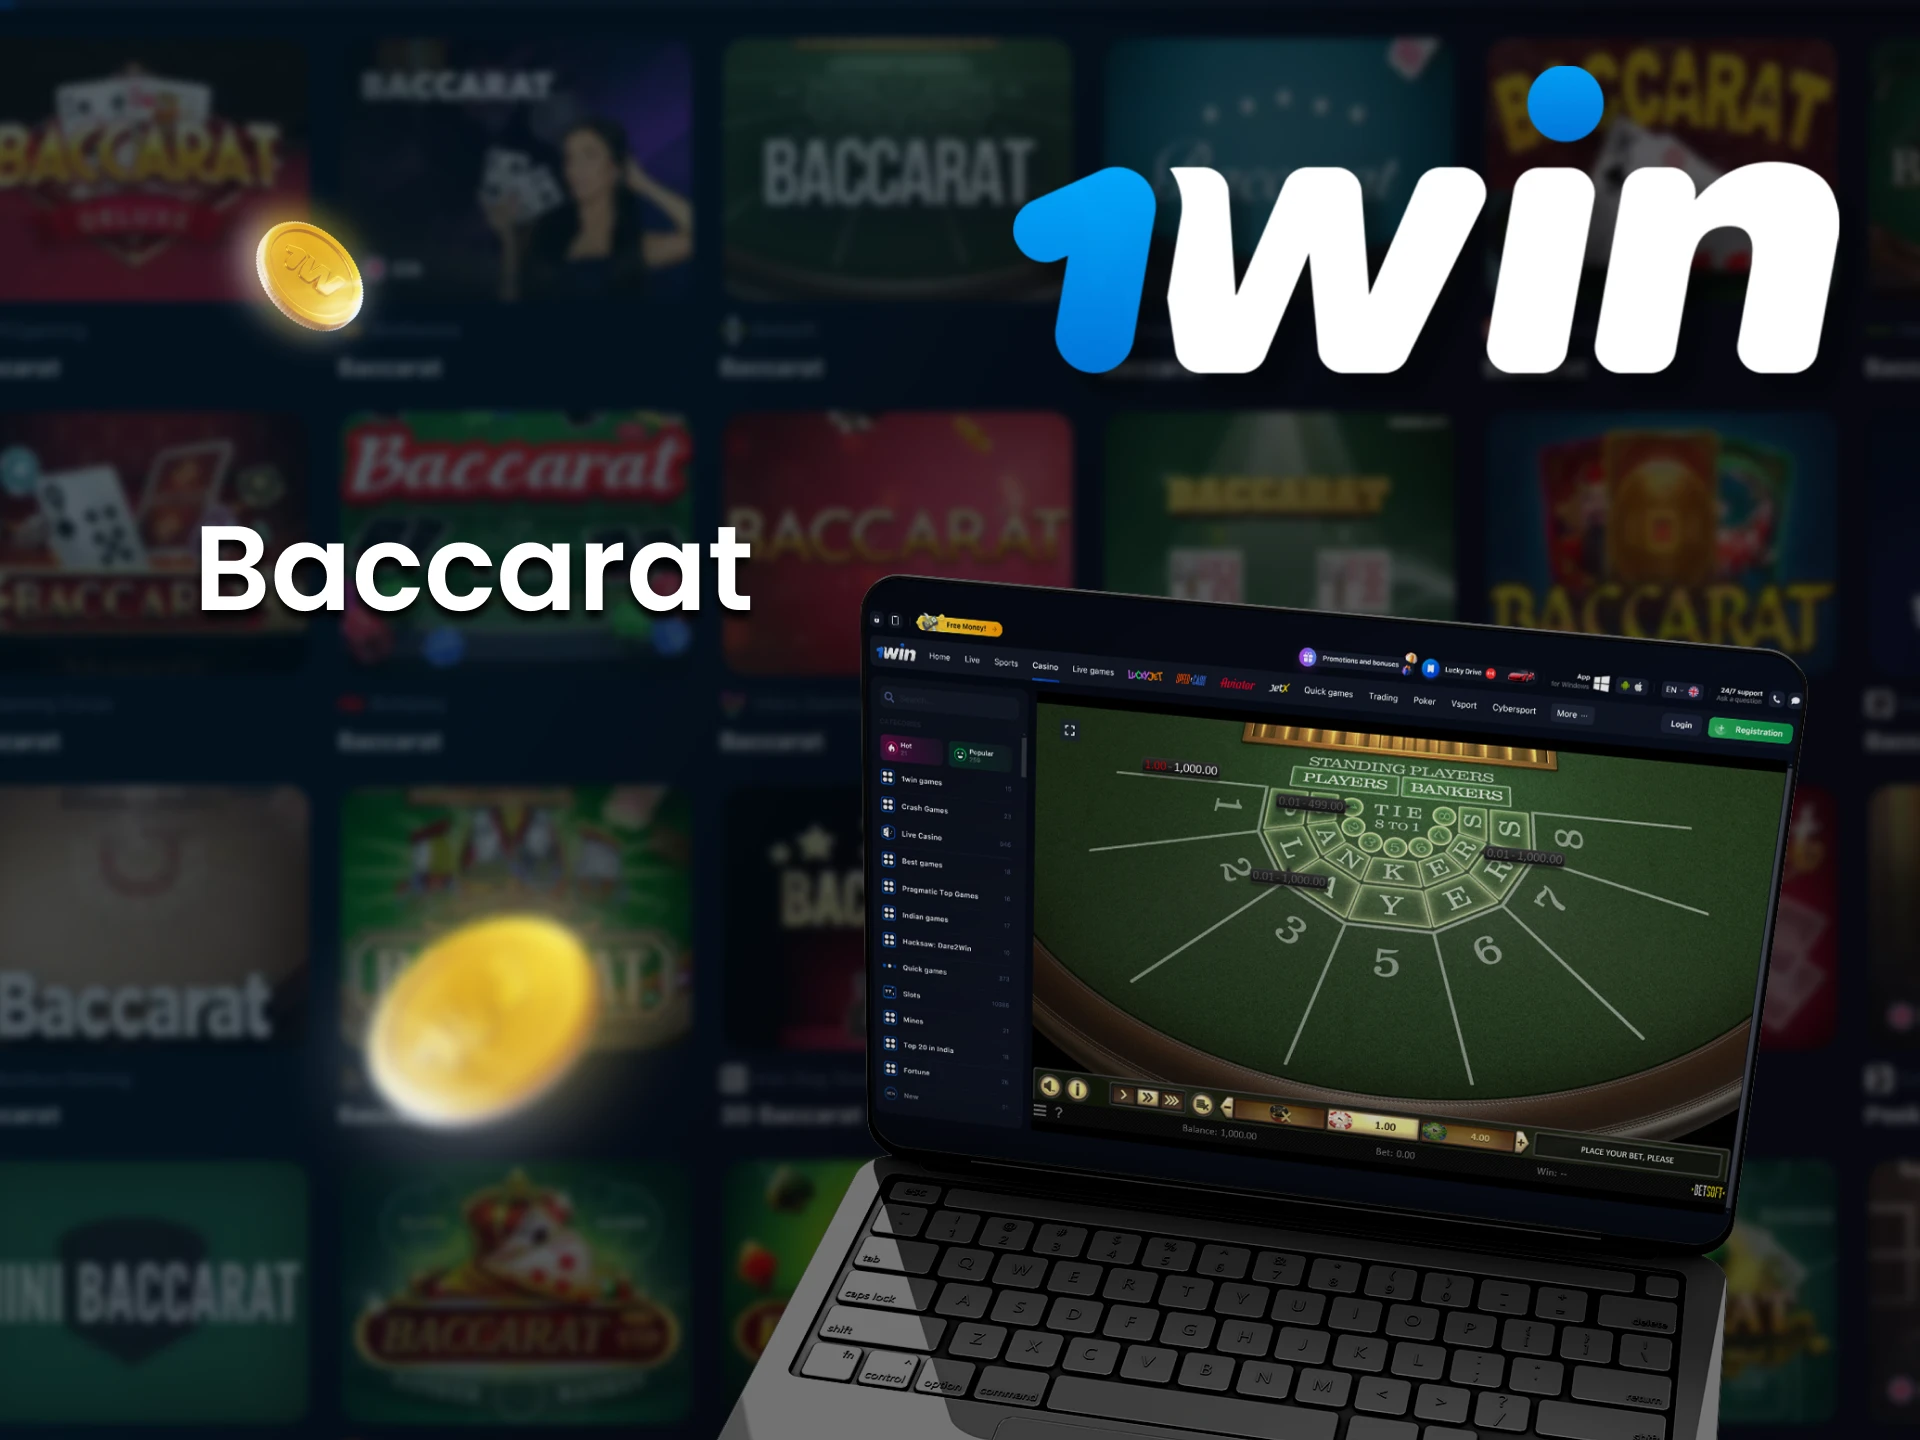 Play Baccarat with 1win.